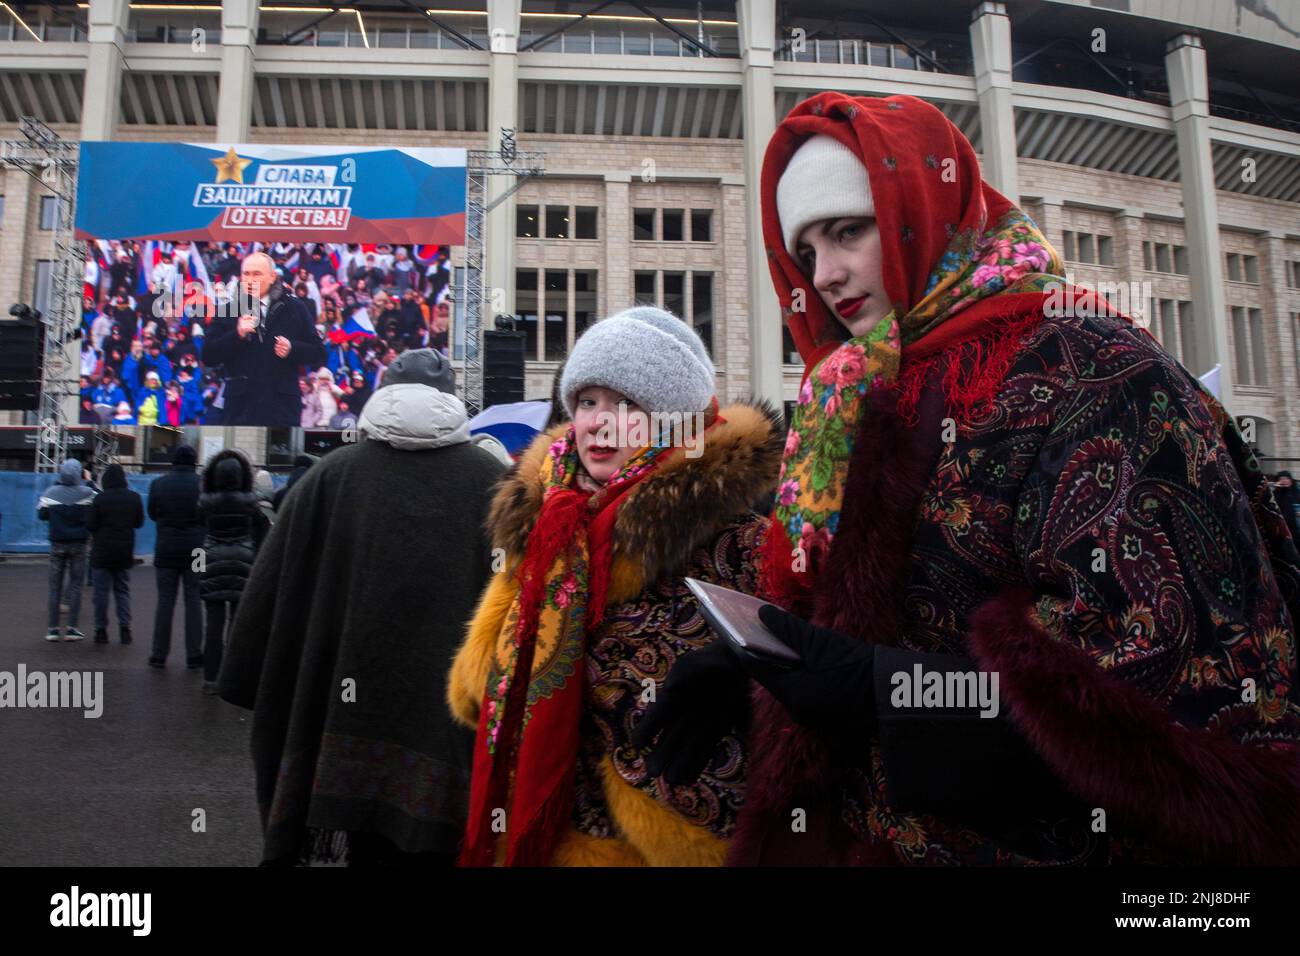 Moscow, Russia. 22nd of February, 2023. People are seen during an open-air concert and rally titled 'Glory to Defenders of Our Fatherland' in Luzhniki stadium, on the eve of Russia's Defender of the Fatherland Day, in Moscow, Russia. Nikolay Vinokurov/Alamy Live News Stock Photo